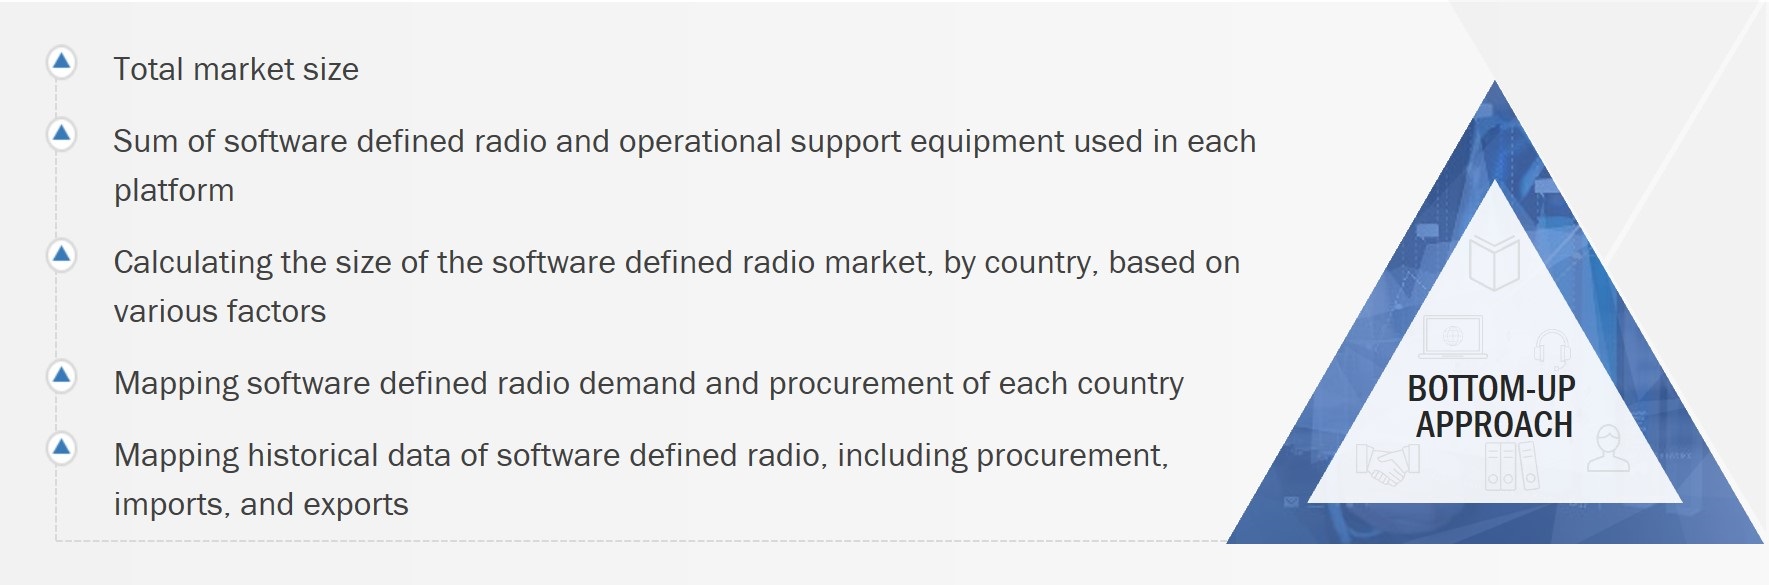 Software Defined Radio Market Size, and Bottom-Up Approach 